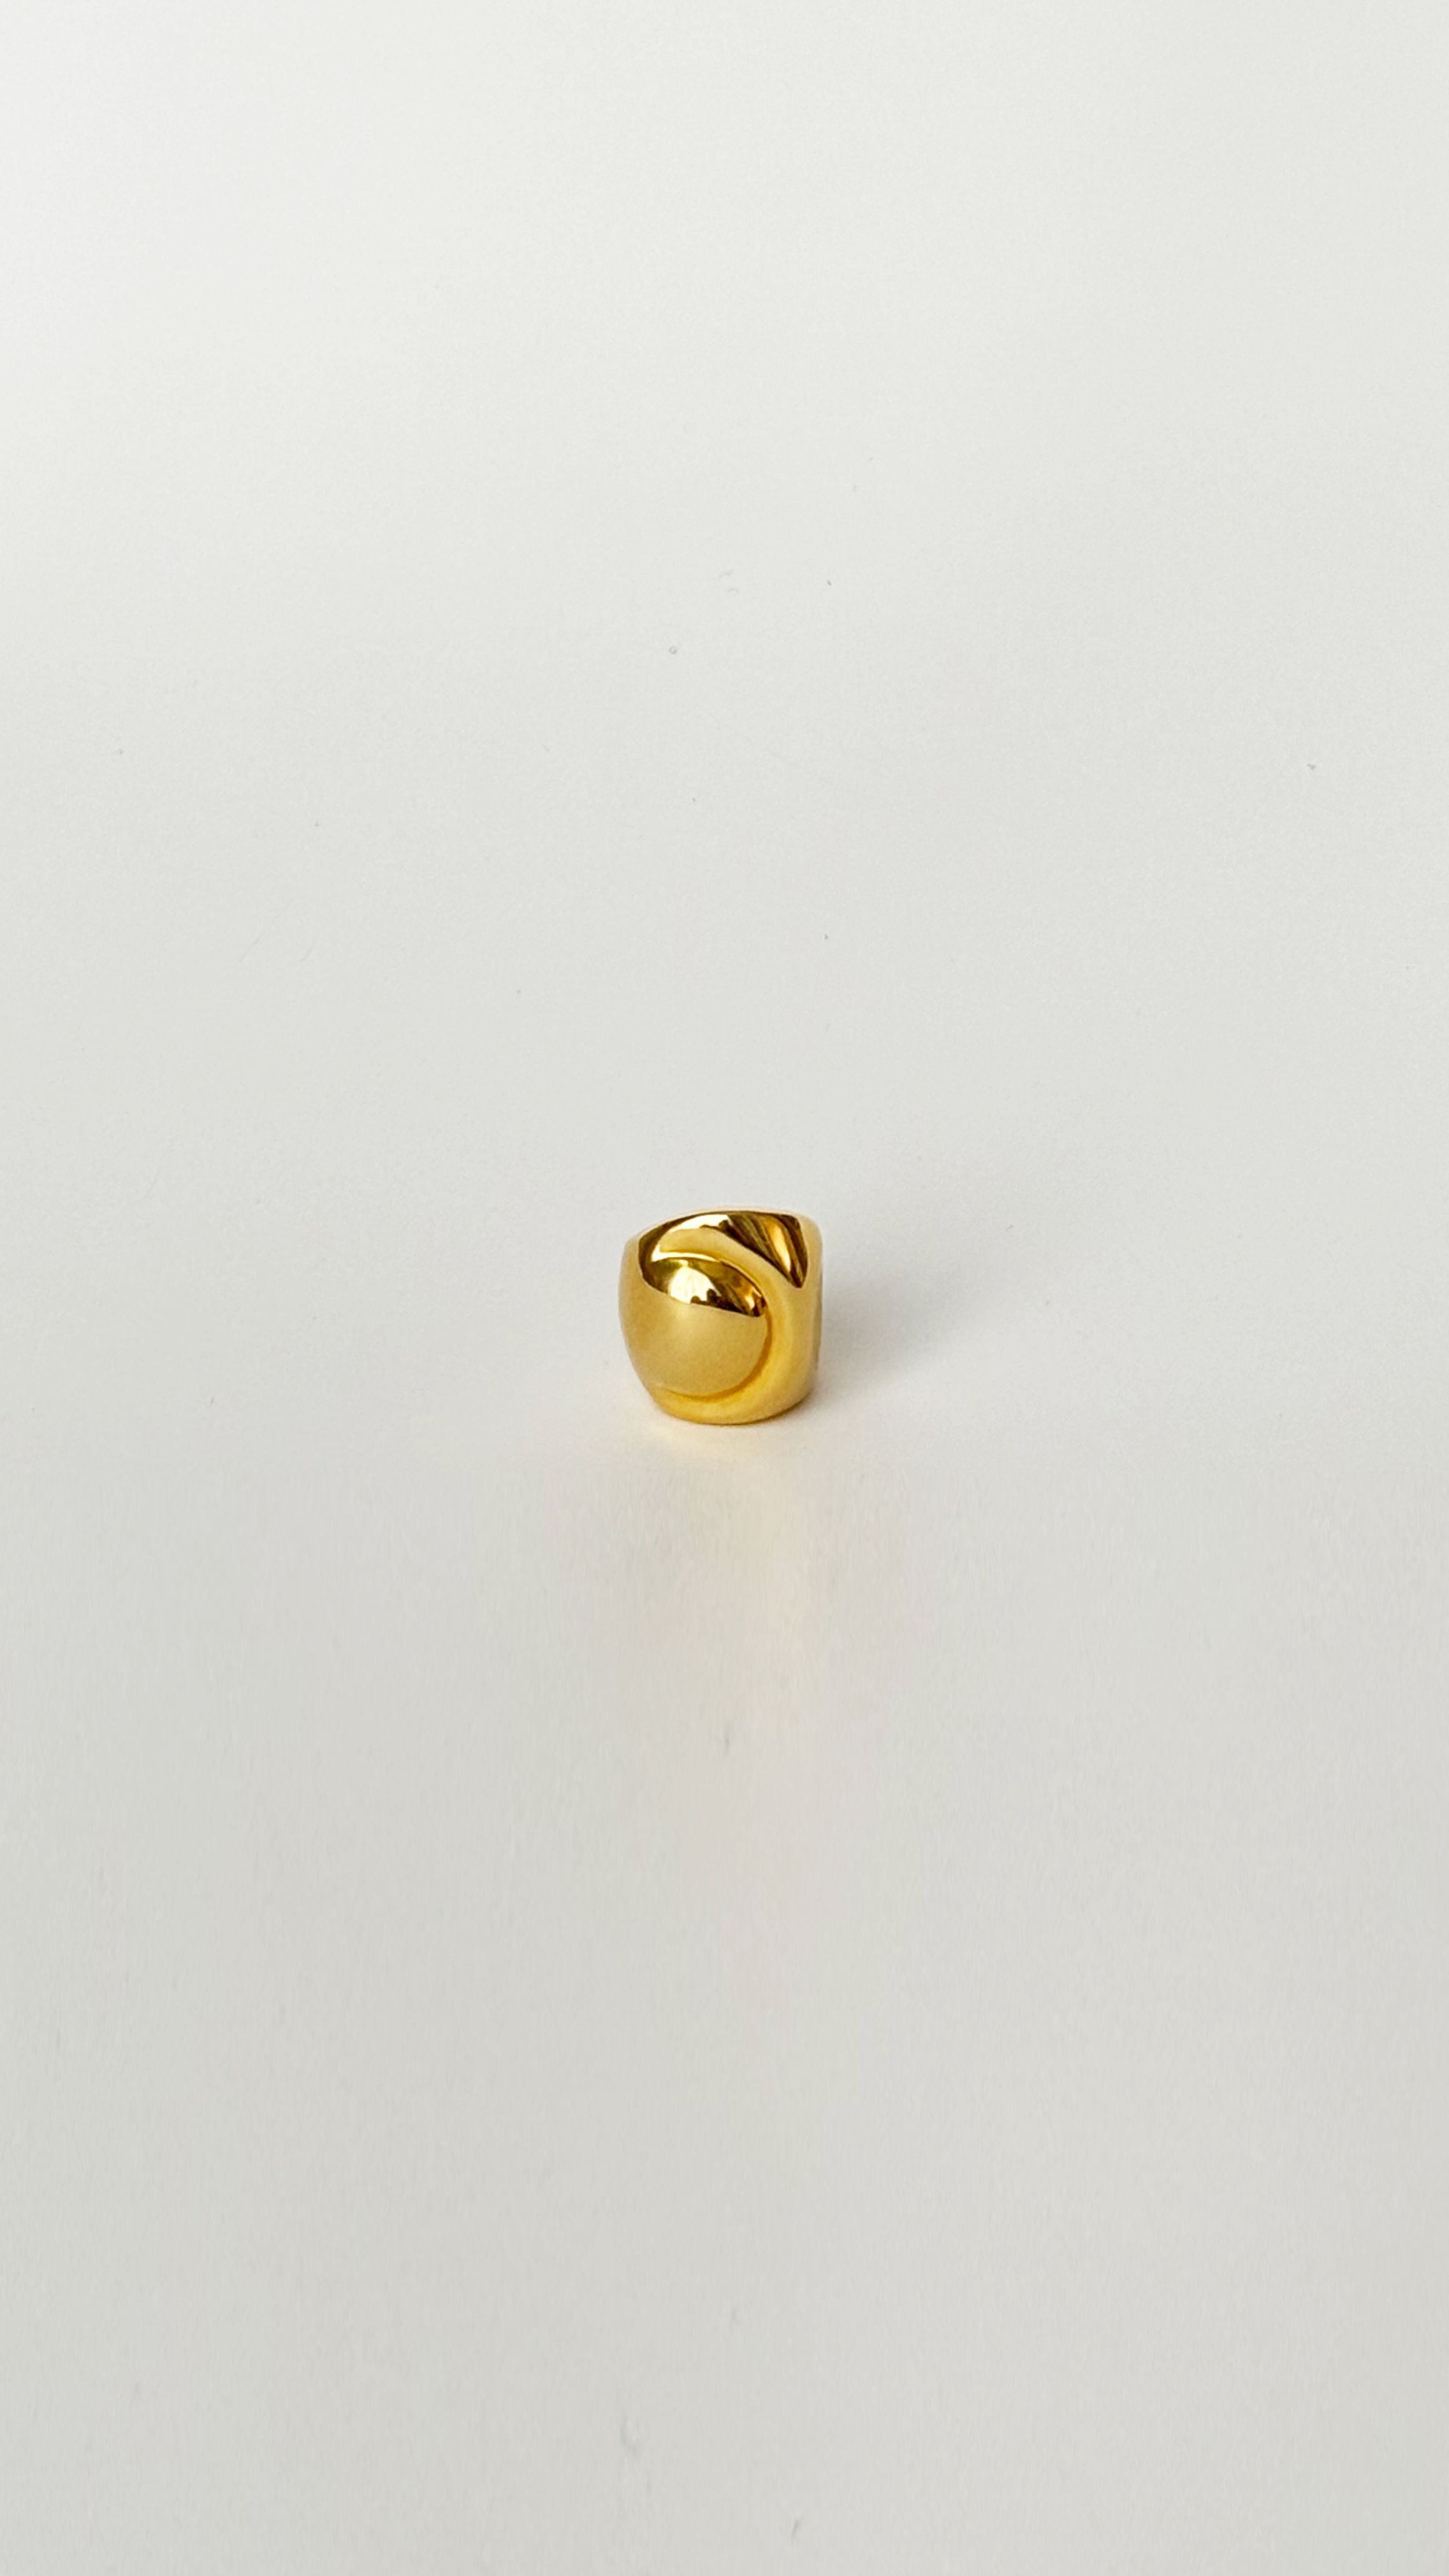 Monica Sordo Cubagua Earcuff Small. Handmade in Peru, sustainable jewelry. Photo of the 24K gold plated ear cuff from the front.